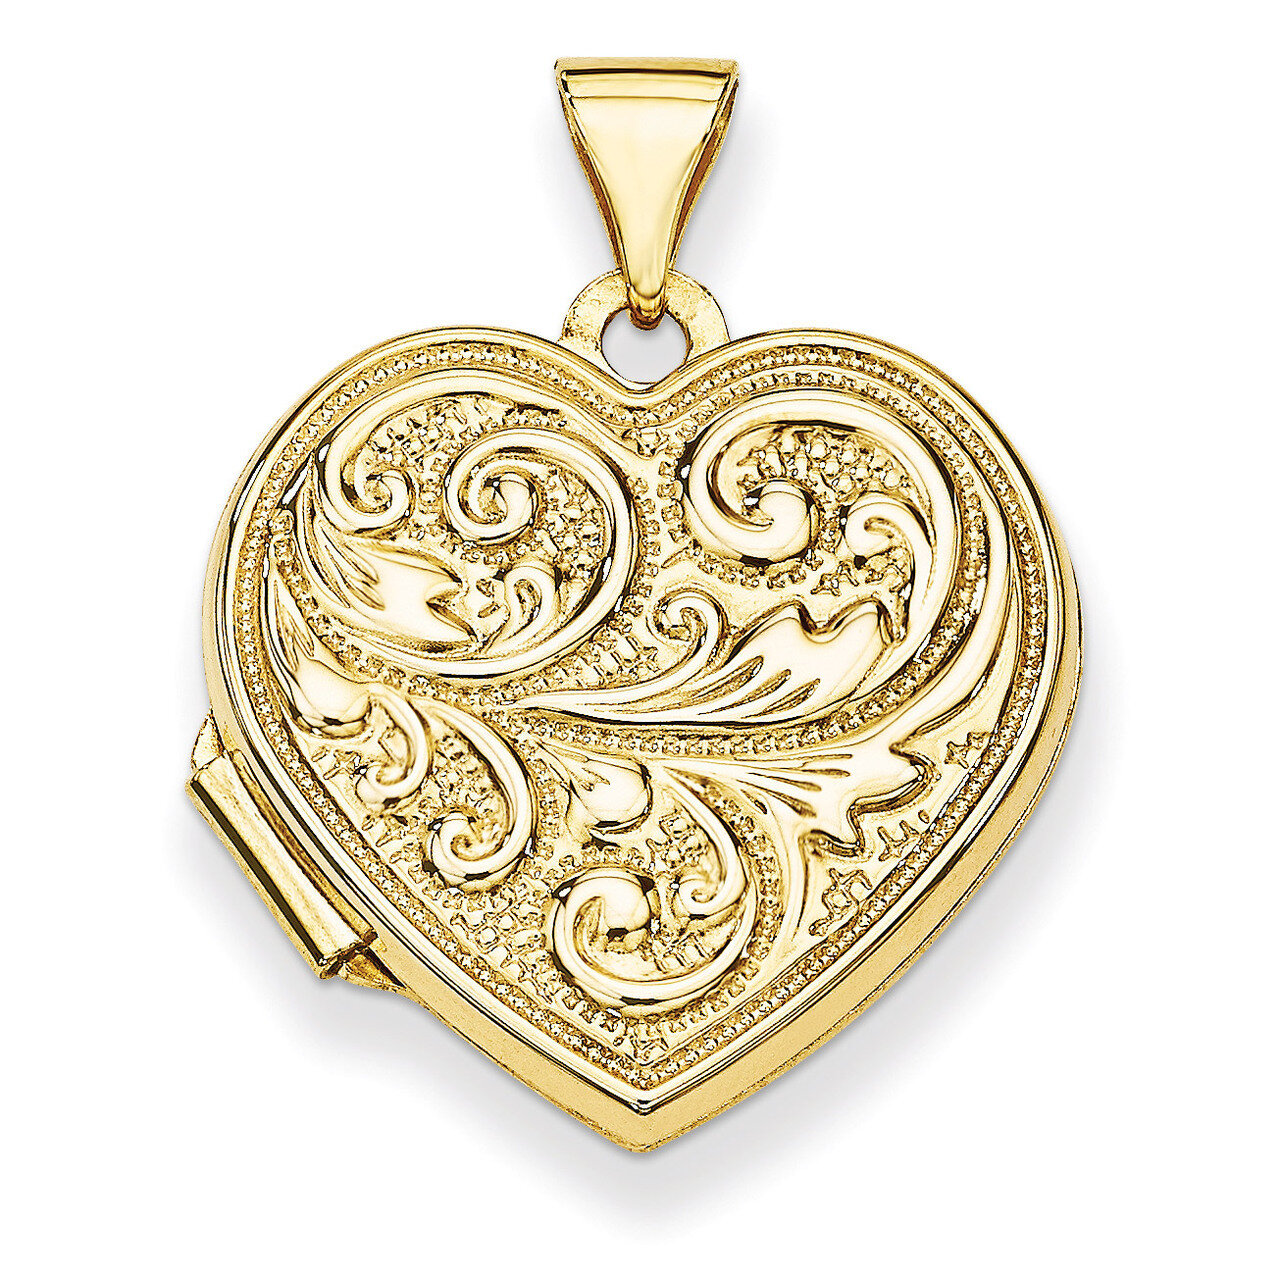 Scrolled Love you always Heart Locket 14k Yellow Gold XL326